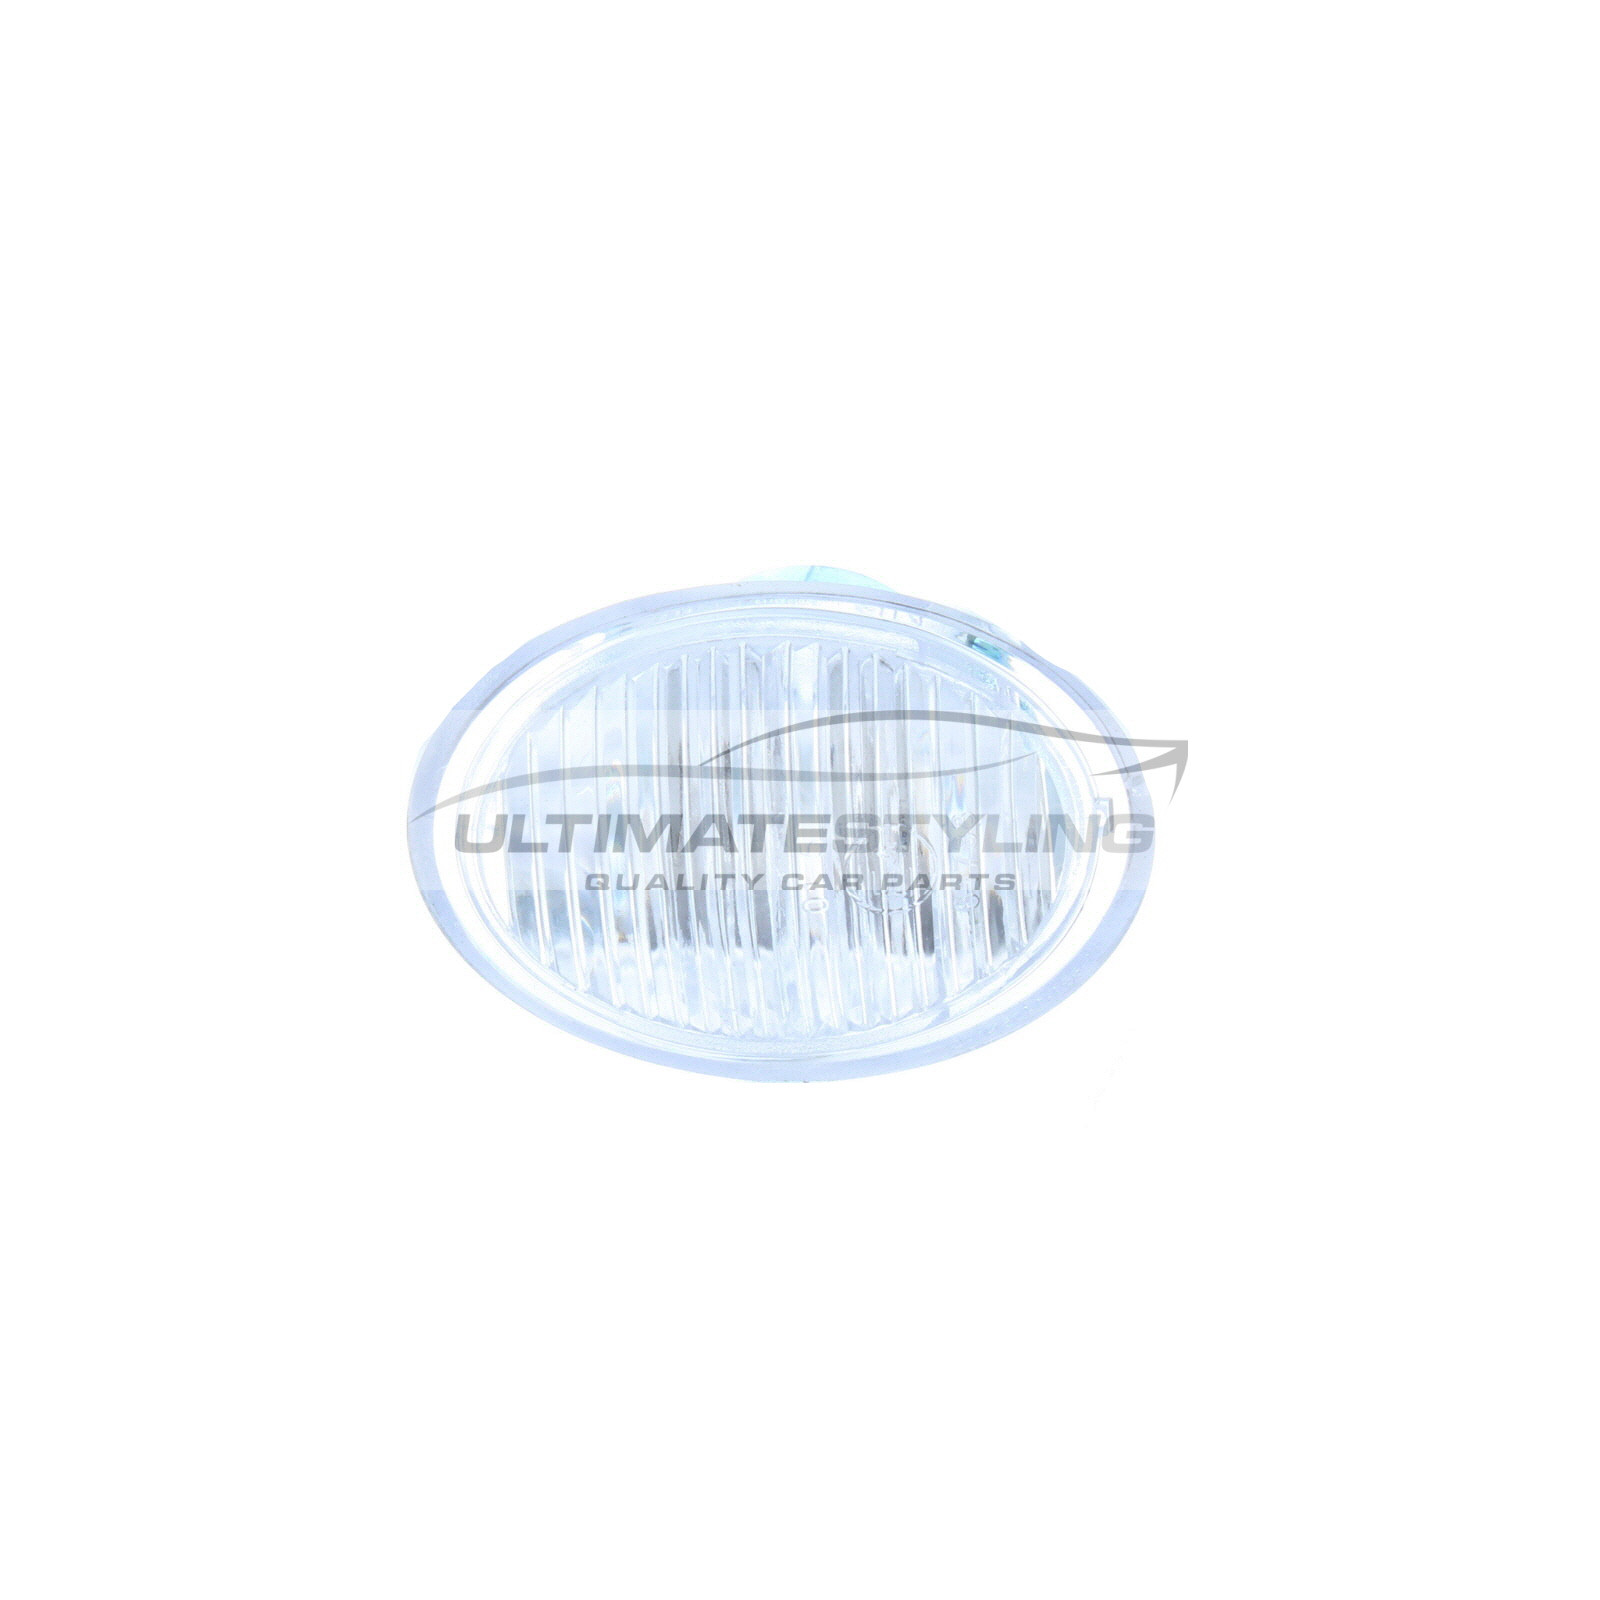 Abarth 500 / 595 / 695, Fiat 500 / 500L Side Repeater - Universal (LH or RH) - Clear lens - Non-LED